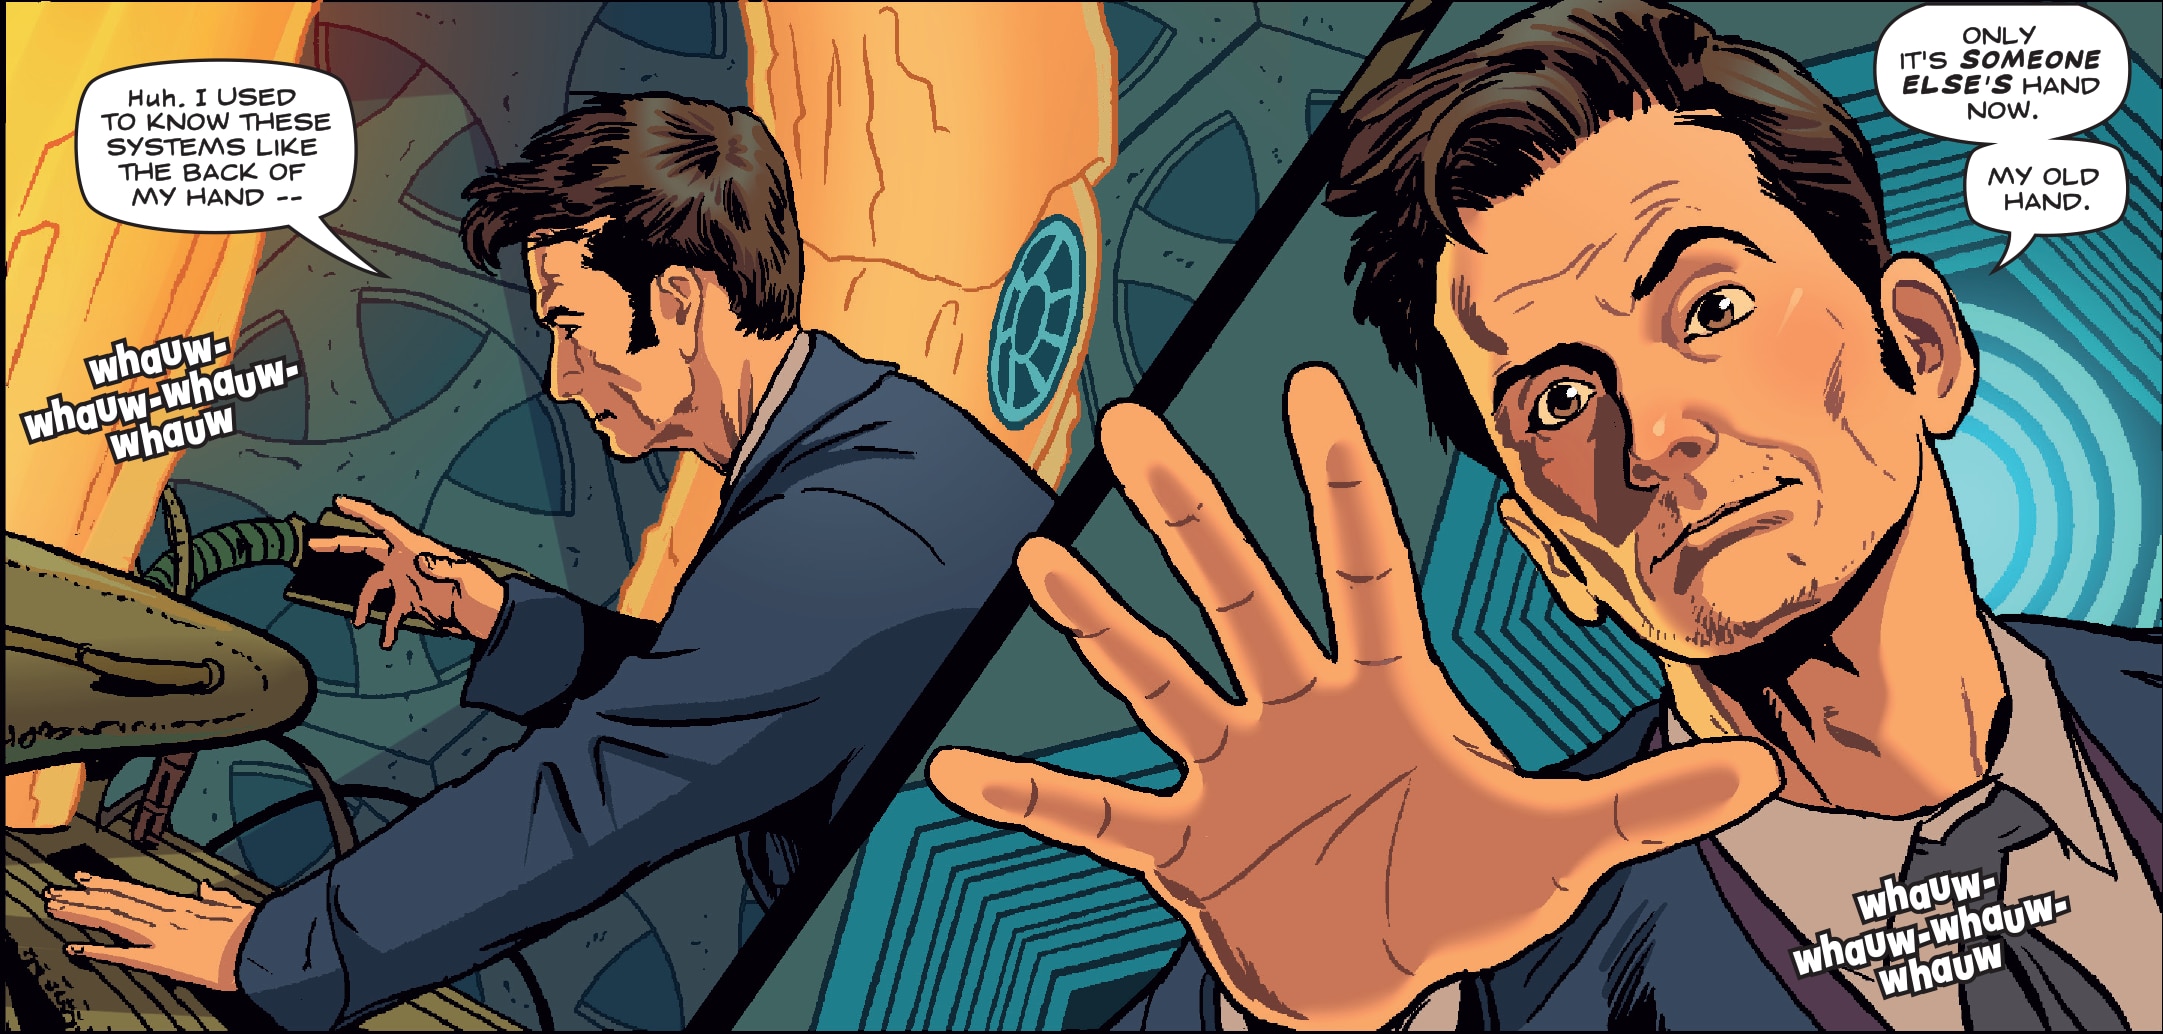 David Tennant as the Fourteenth Doctor in the Doctor Who Magazine comic strip